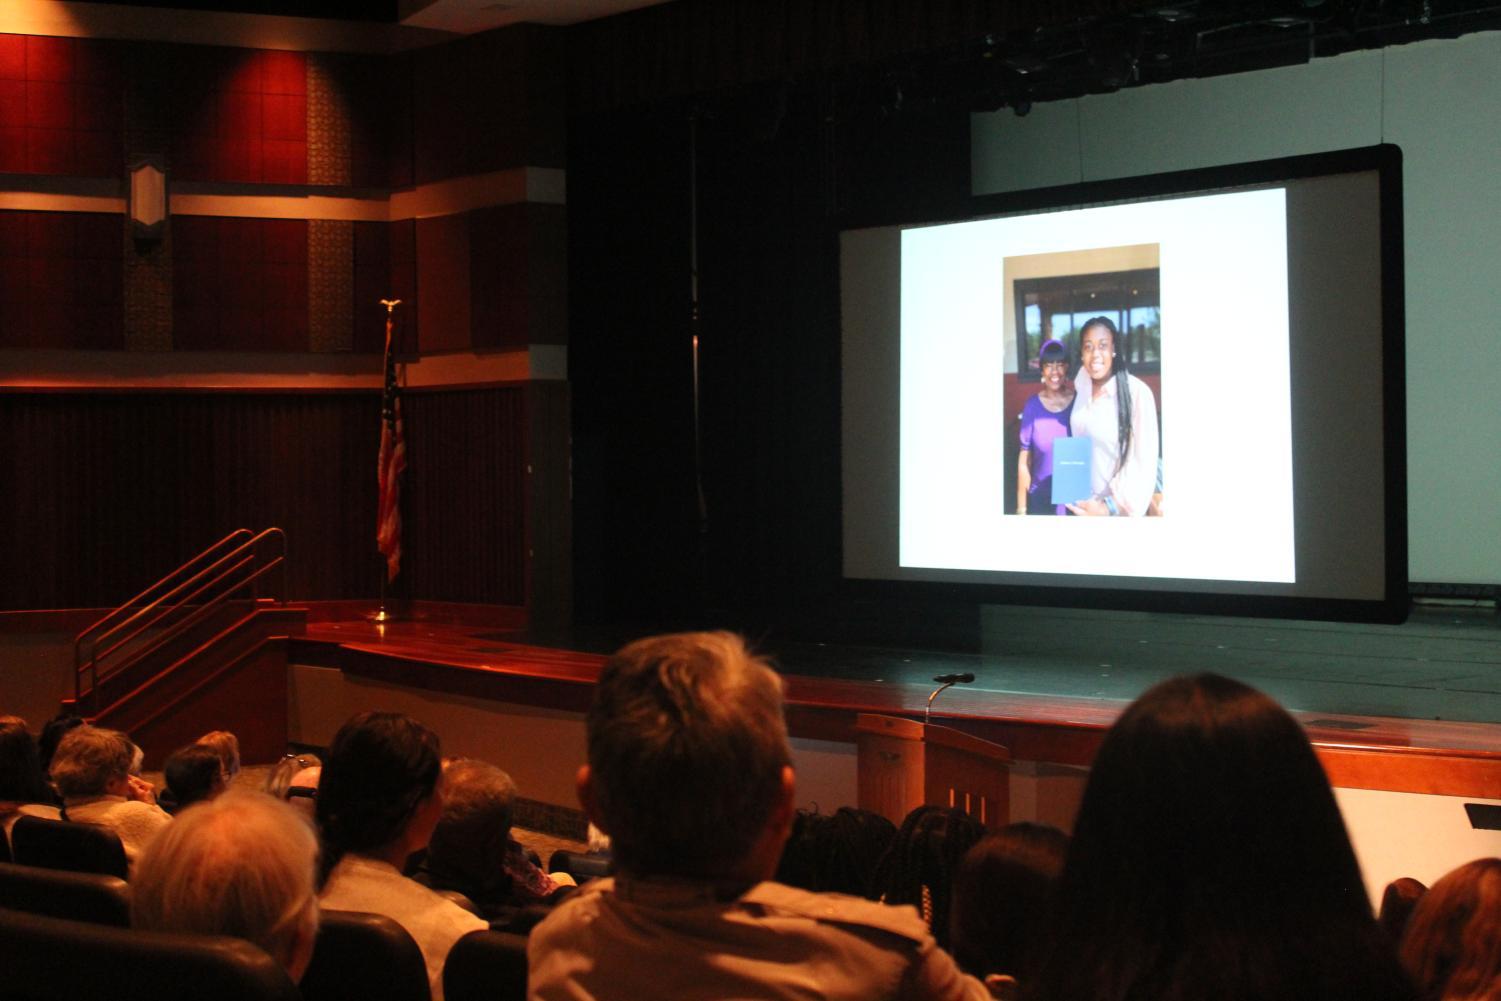 A slideshow of LOTAs and their grandparents is shown in the theater during Grandparents' Day.